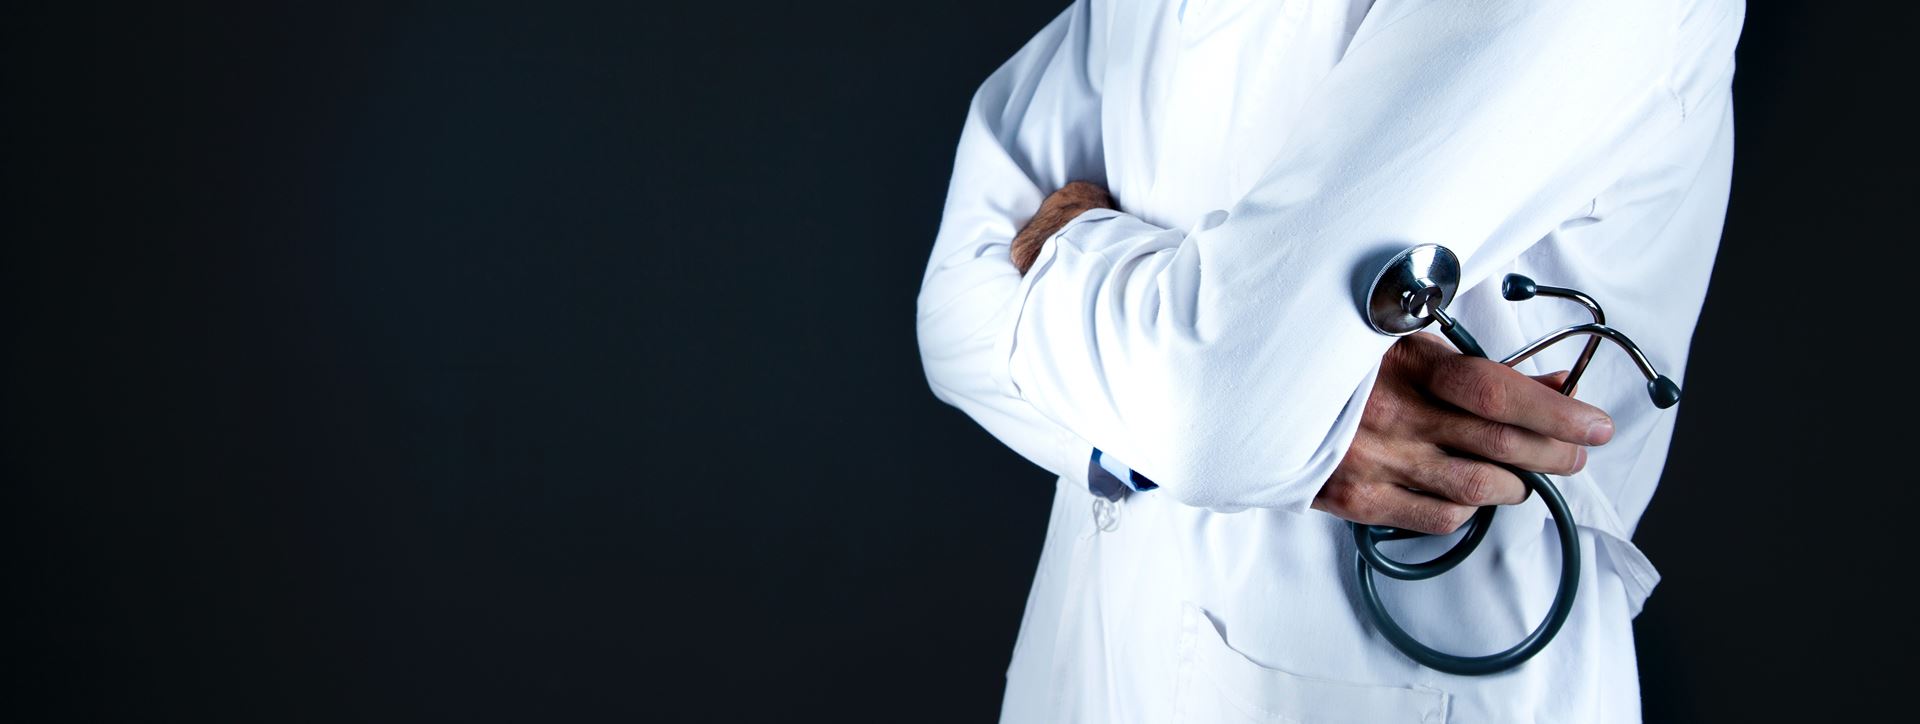 A person in a white coat holding a stethoscope